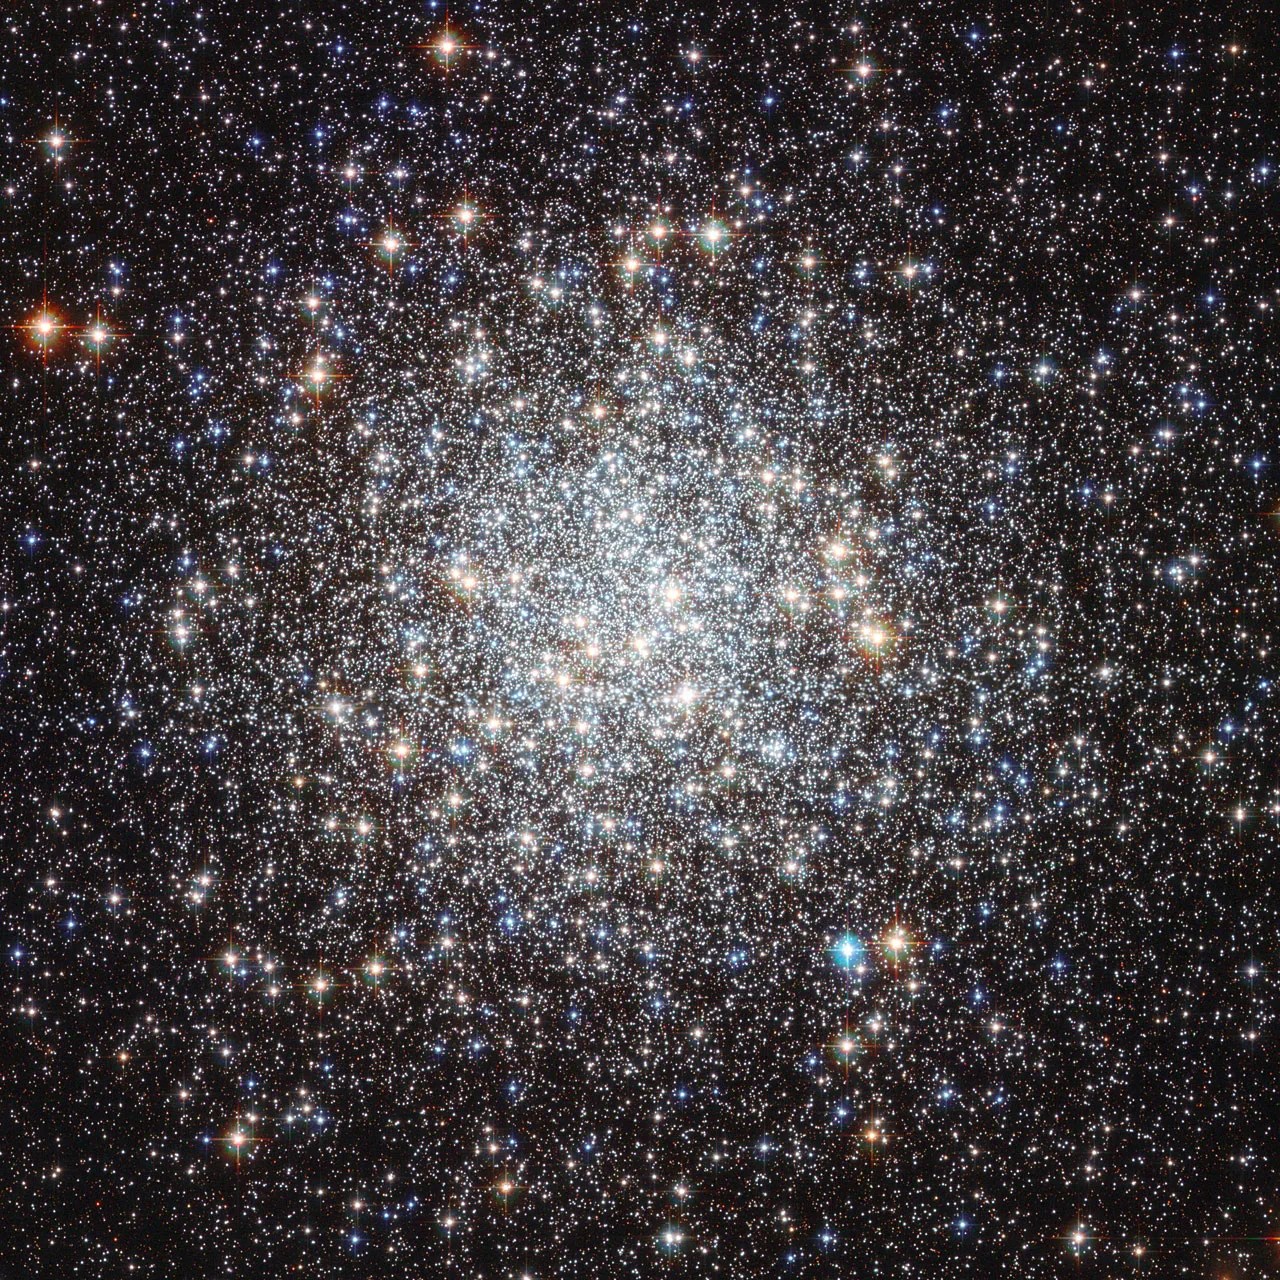 Hubble view of M9